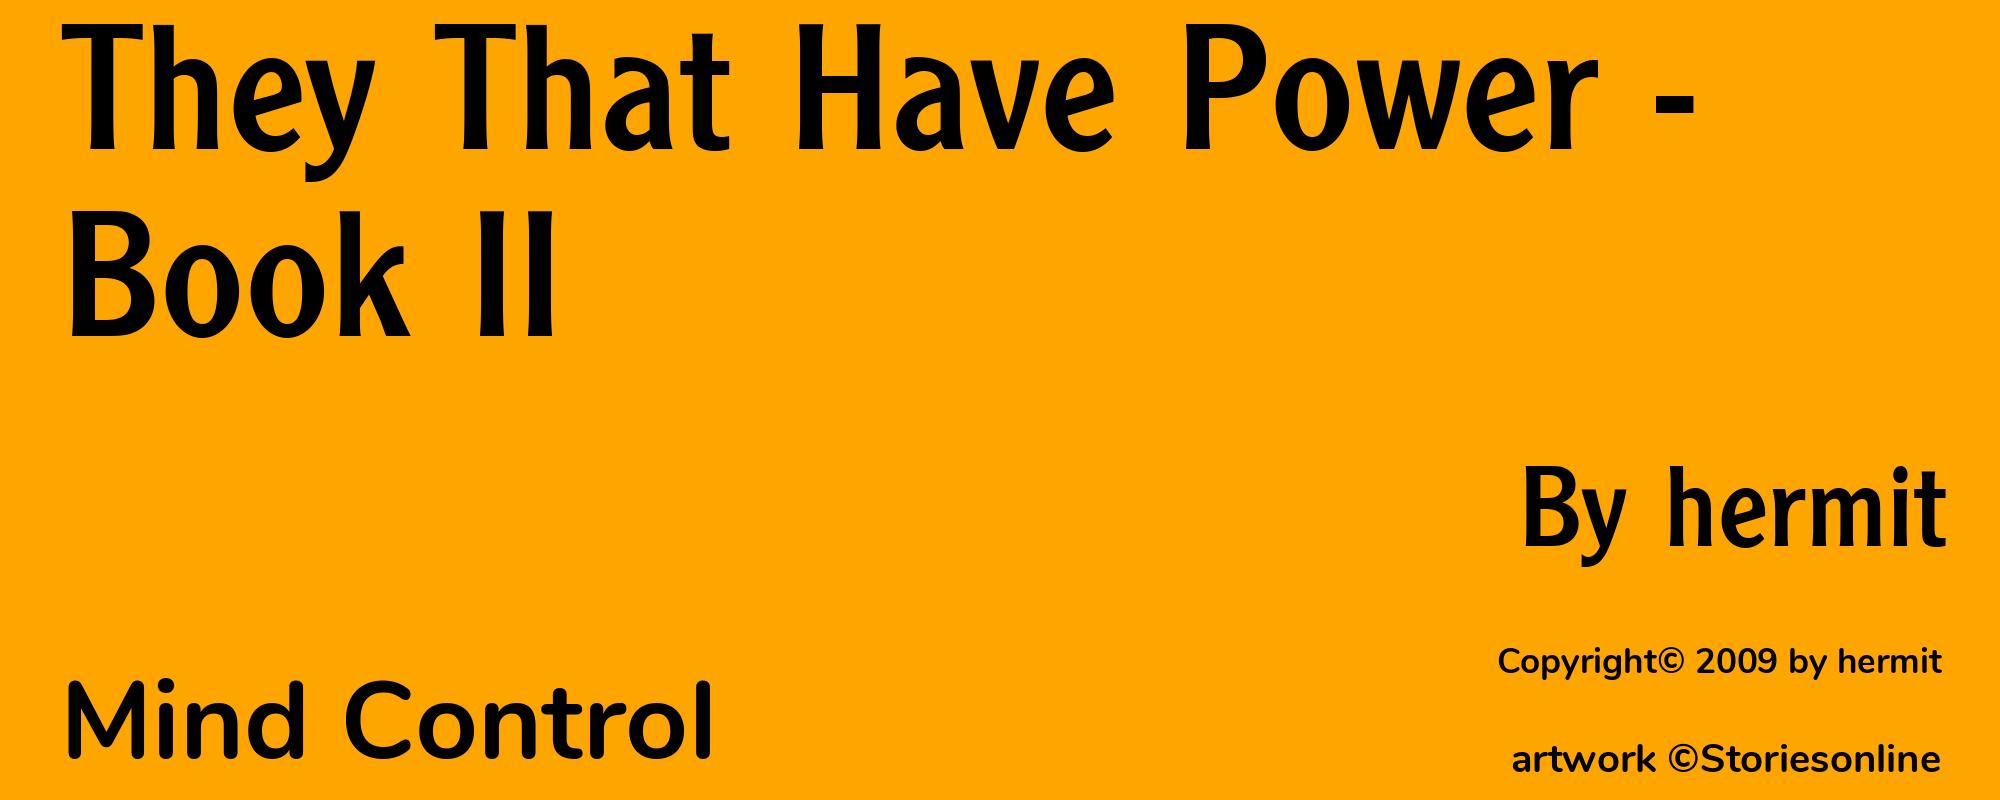 They That Have Power - Book II - Cover